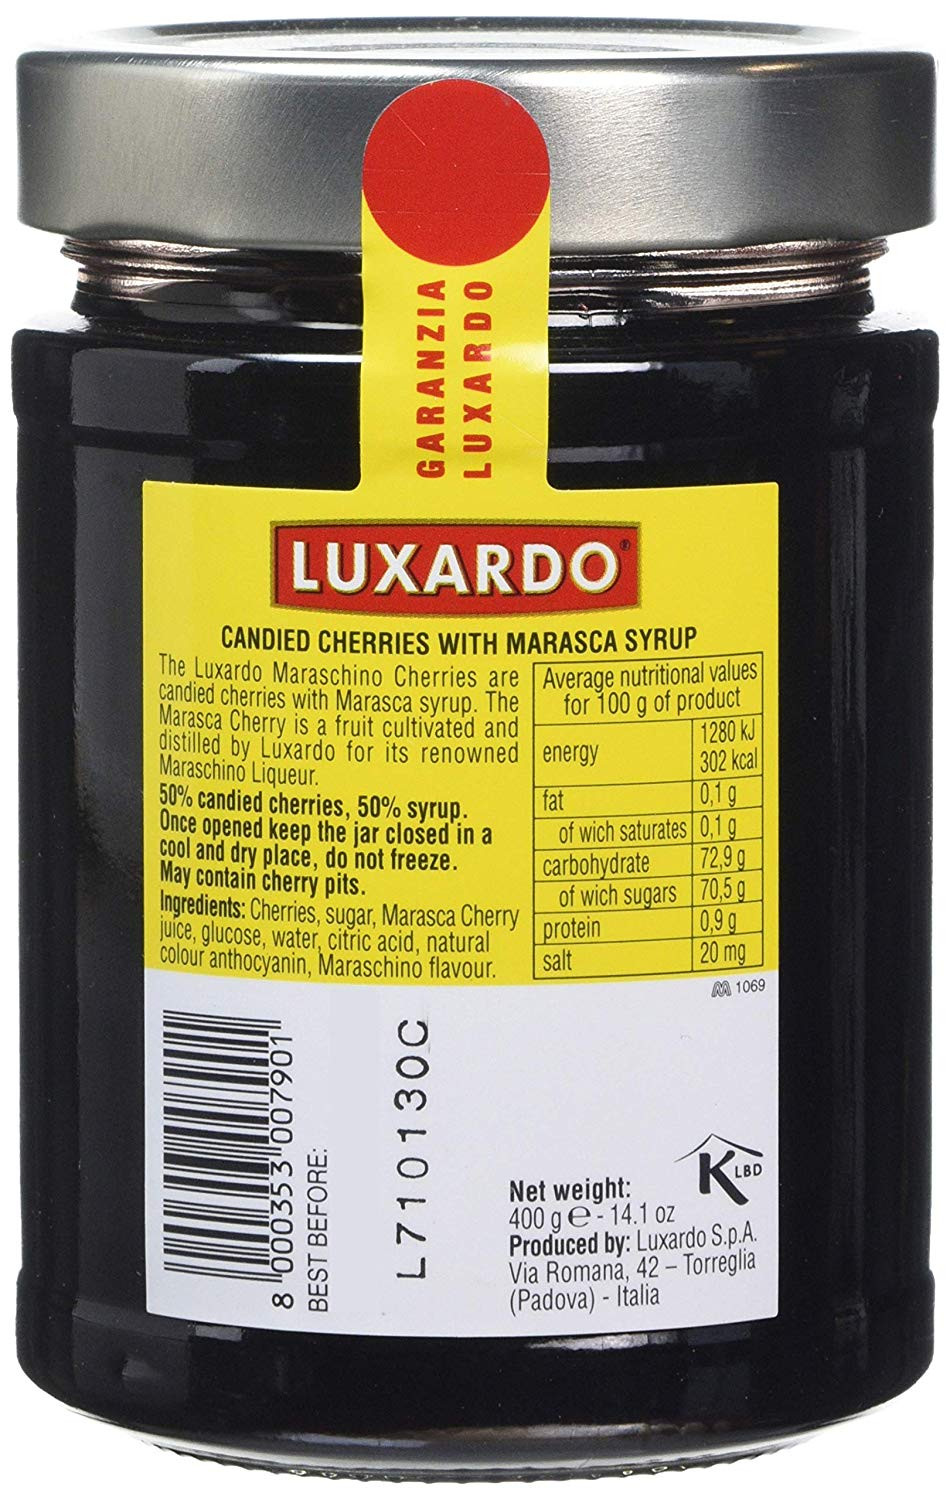 25 Spectacular somerset Ultimate Hardwood Floor Cleaner 2024 free download somerset ultimate hardwood floor cleaner of luxardo maraschino cherries 400g ideal for cocktails cakes and inside luxardo maraschino cherries 400g ideal for cocktails cakes and ice cream ama